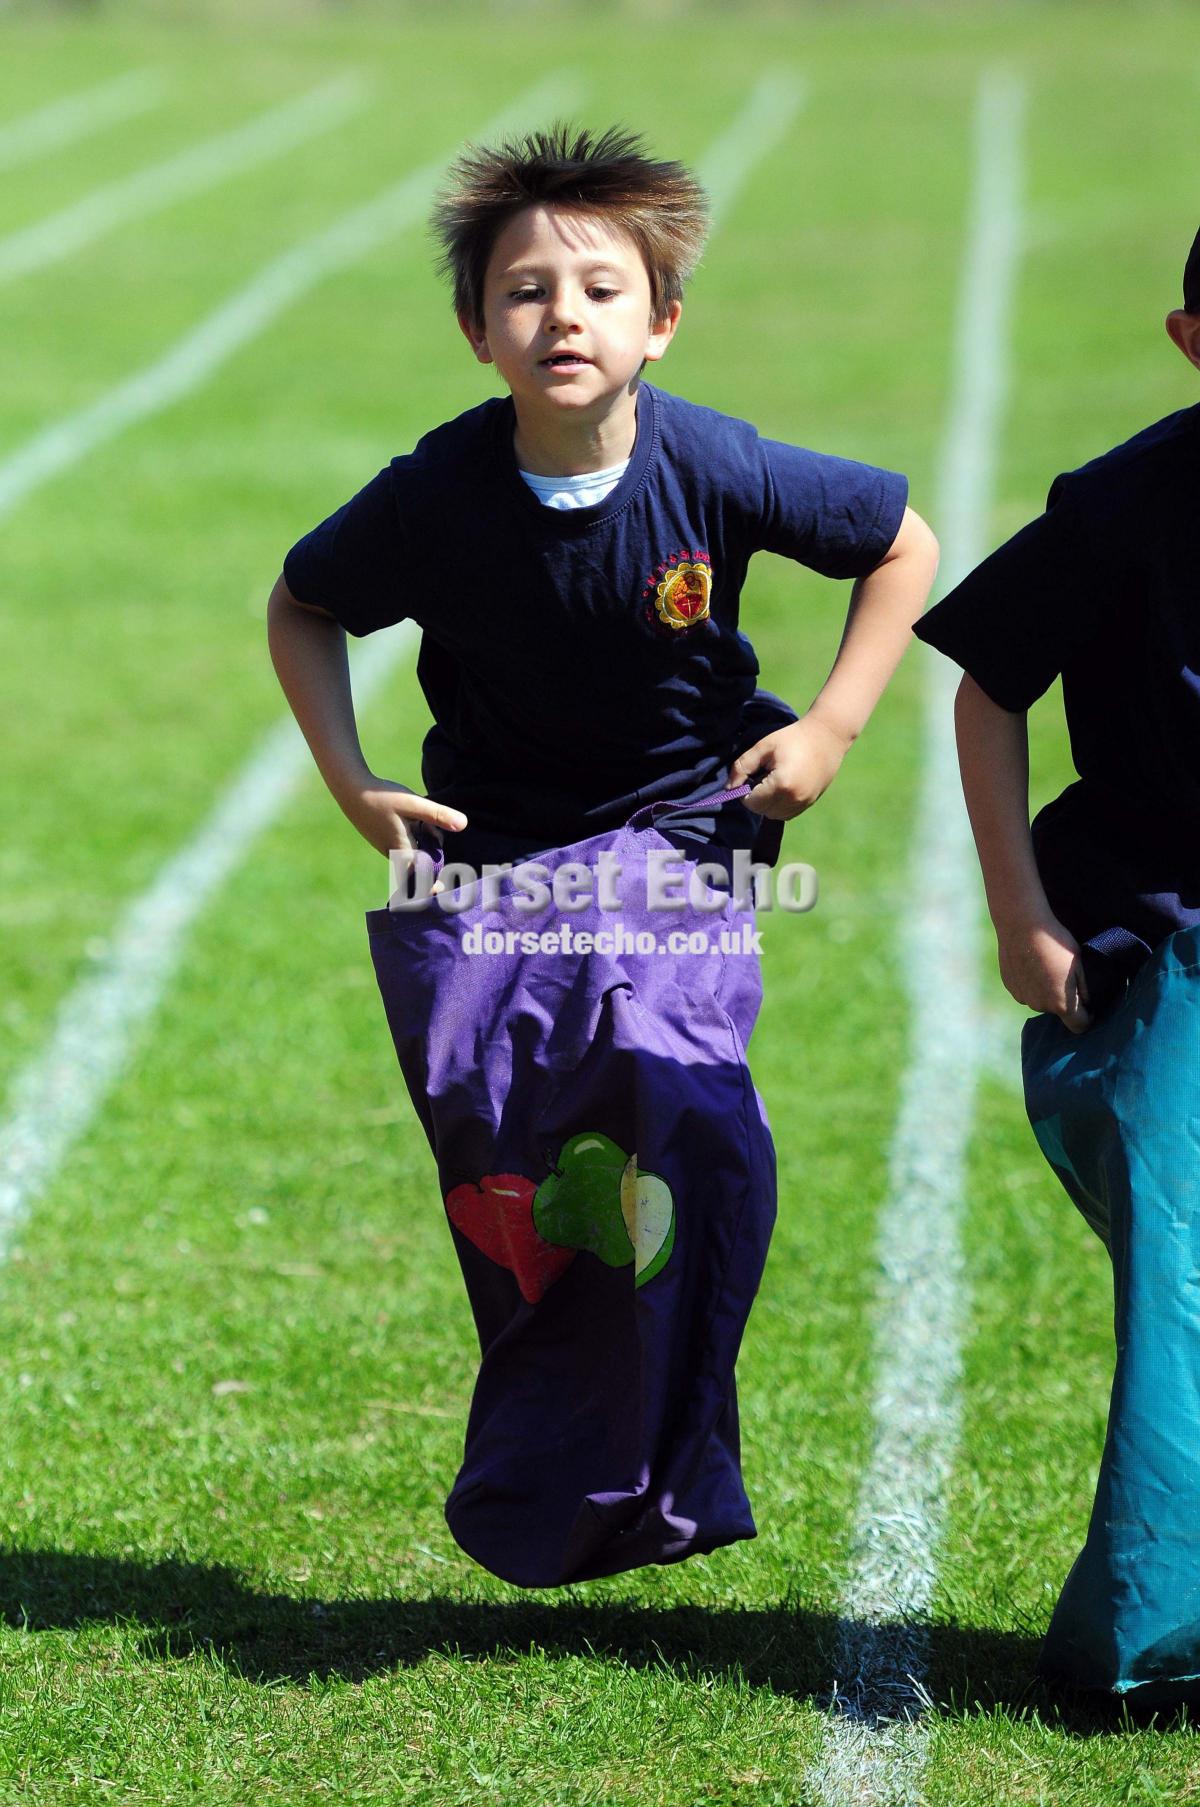 St Mary's Catholic First School sports day